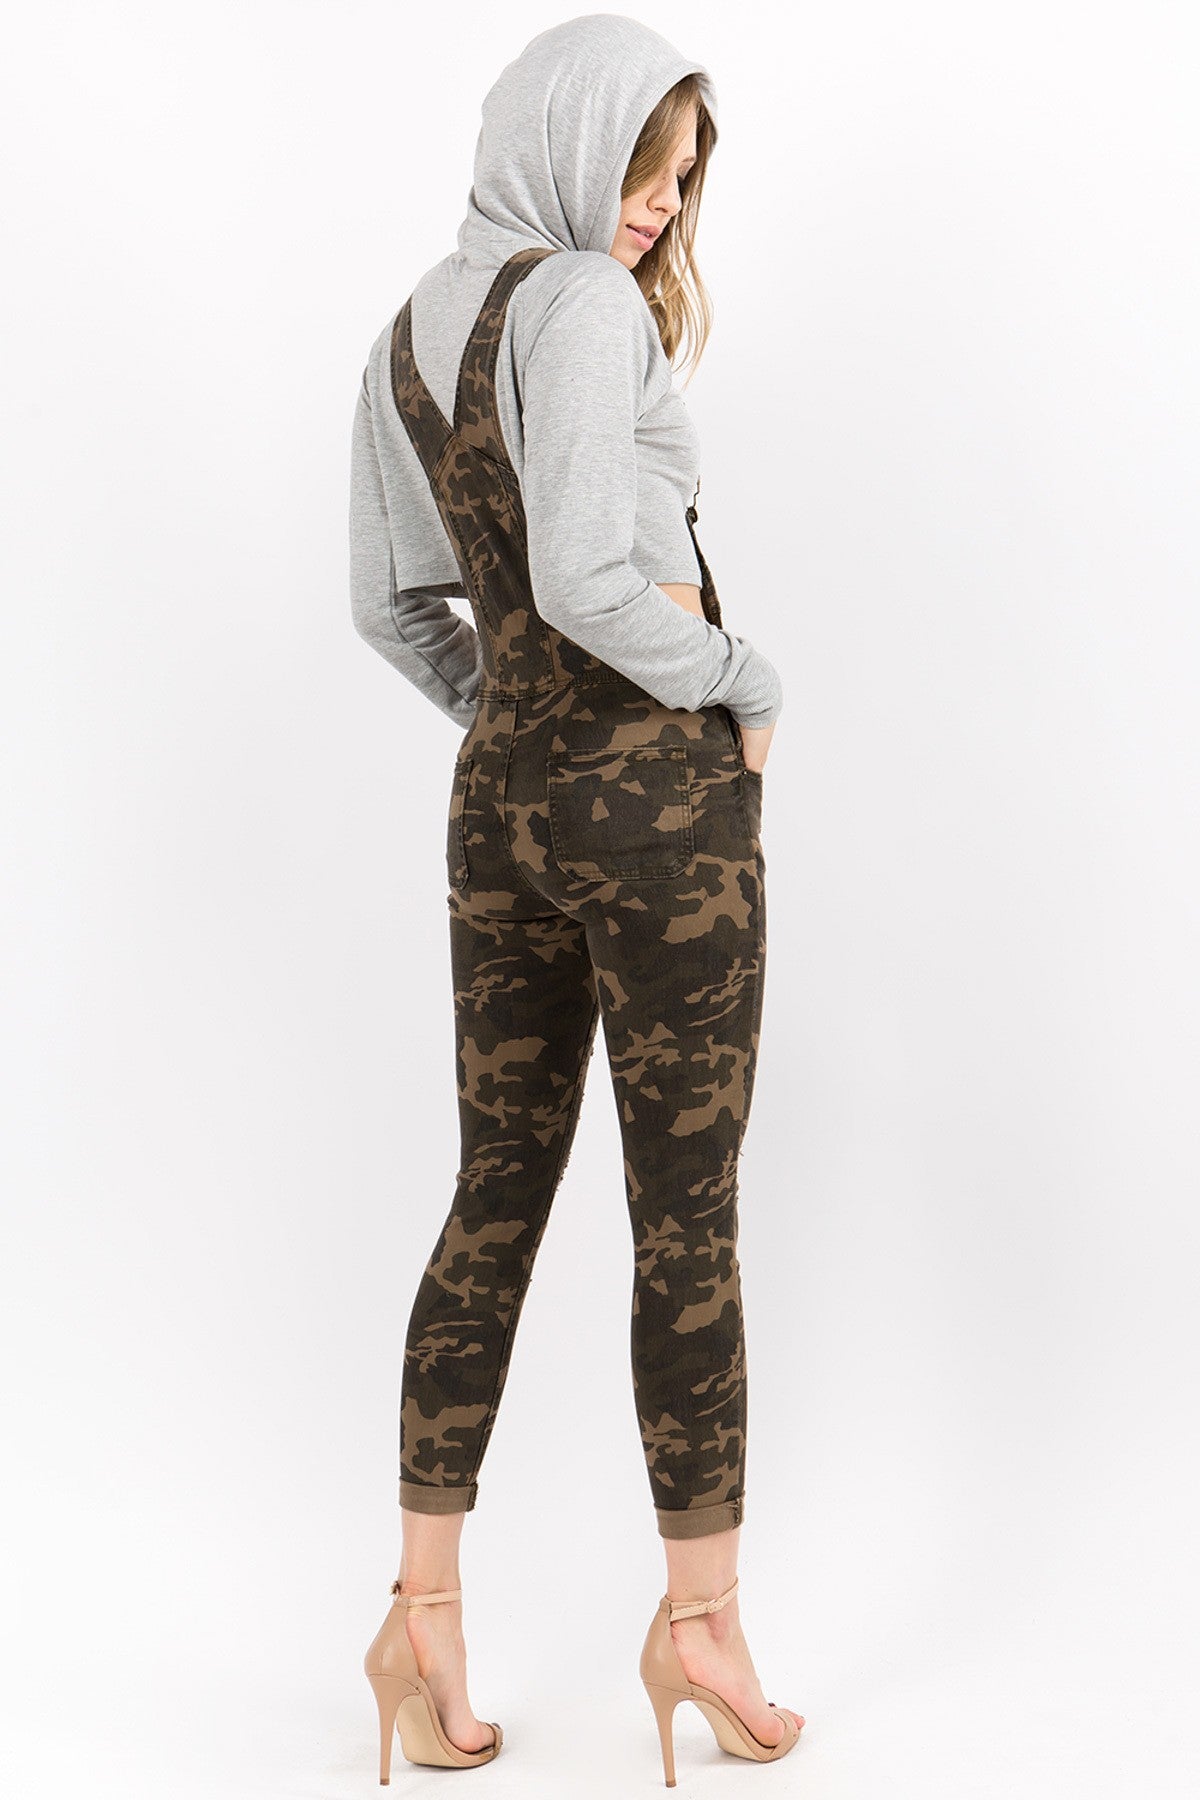 Camo Distressed Overall Bibs - PLUS - jumpsuit